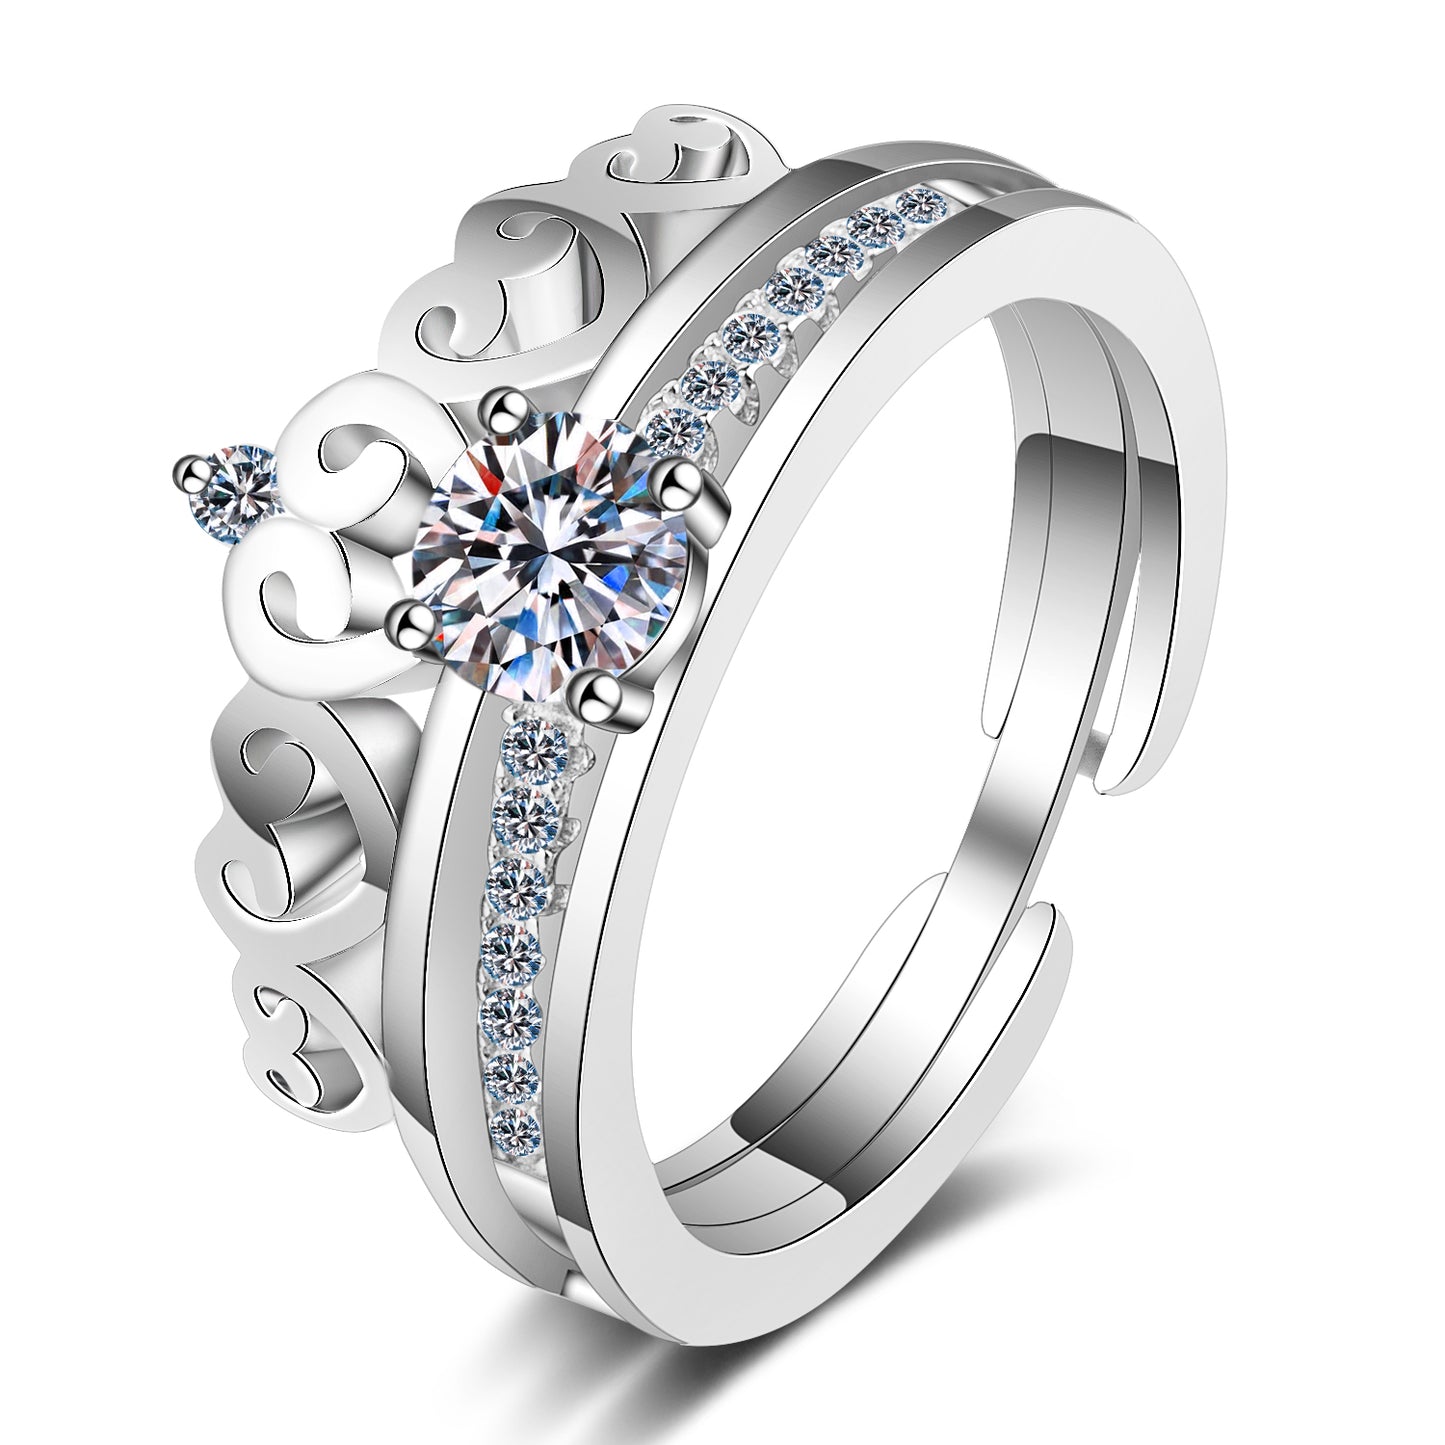 Royal Round Cut Solitaire 0.5 Carat Moissanite Platinum Plated Engagement Ring and Crown-Shaped Band - Bridal Set